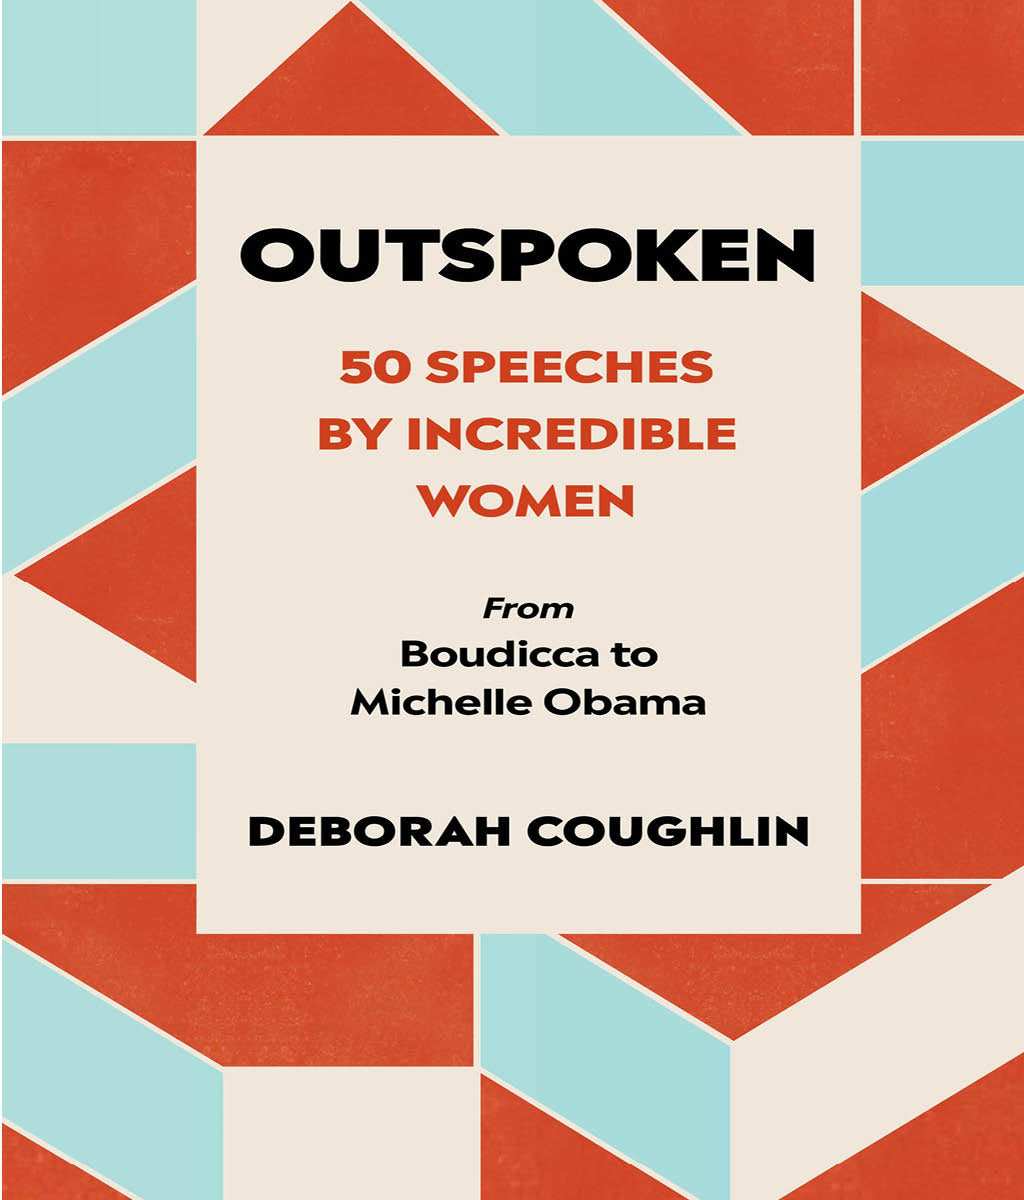 Outspoken: 50 Speeches by Incredible Women from Boudicca to Michelle Obama Deborah Coughlin